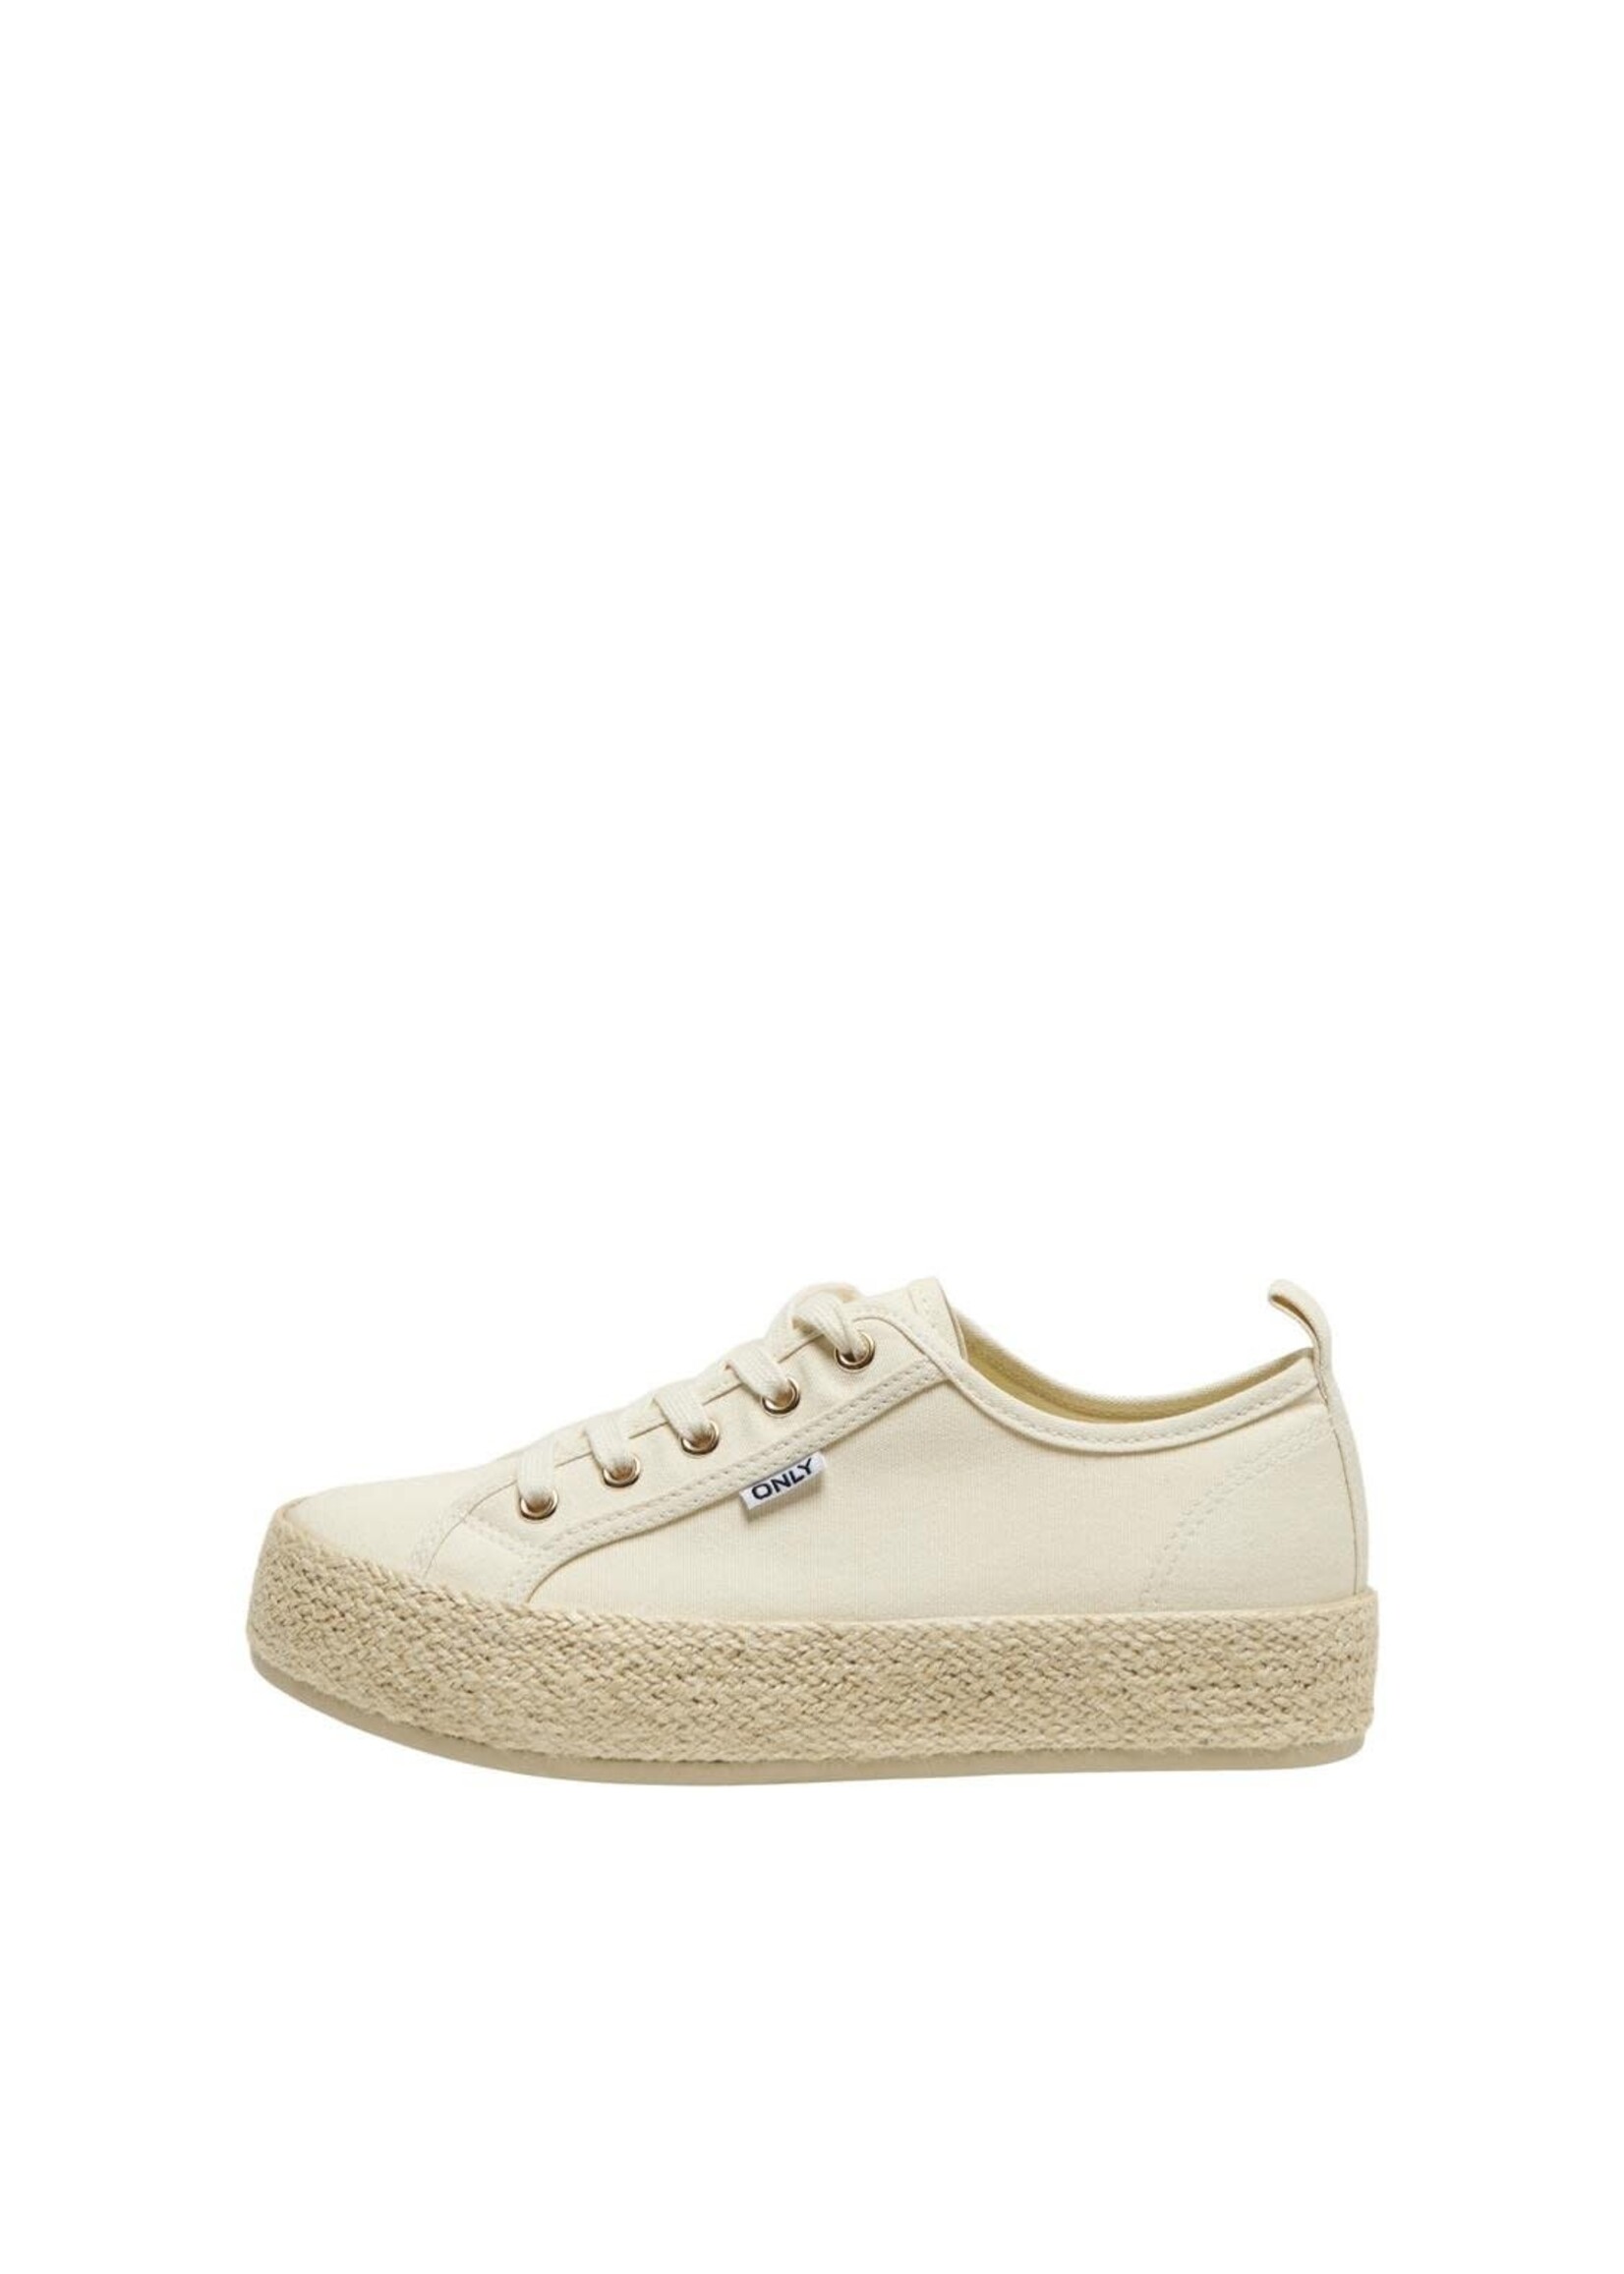 ONLY IDA-1 LACE UP ESPADRILLE SNEAKER creme